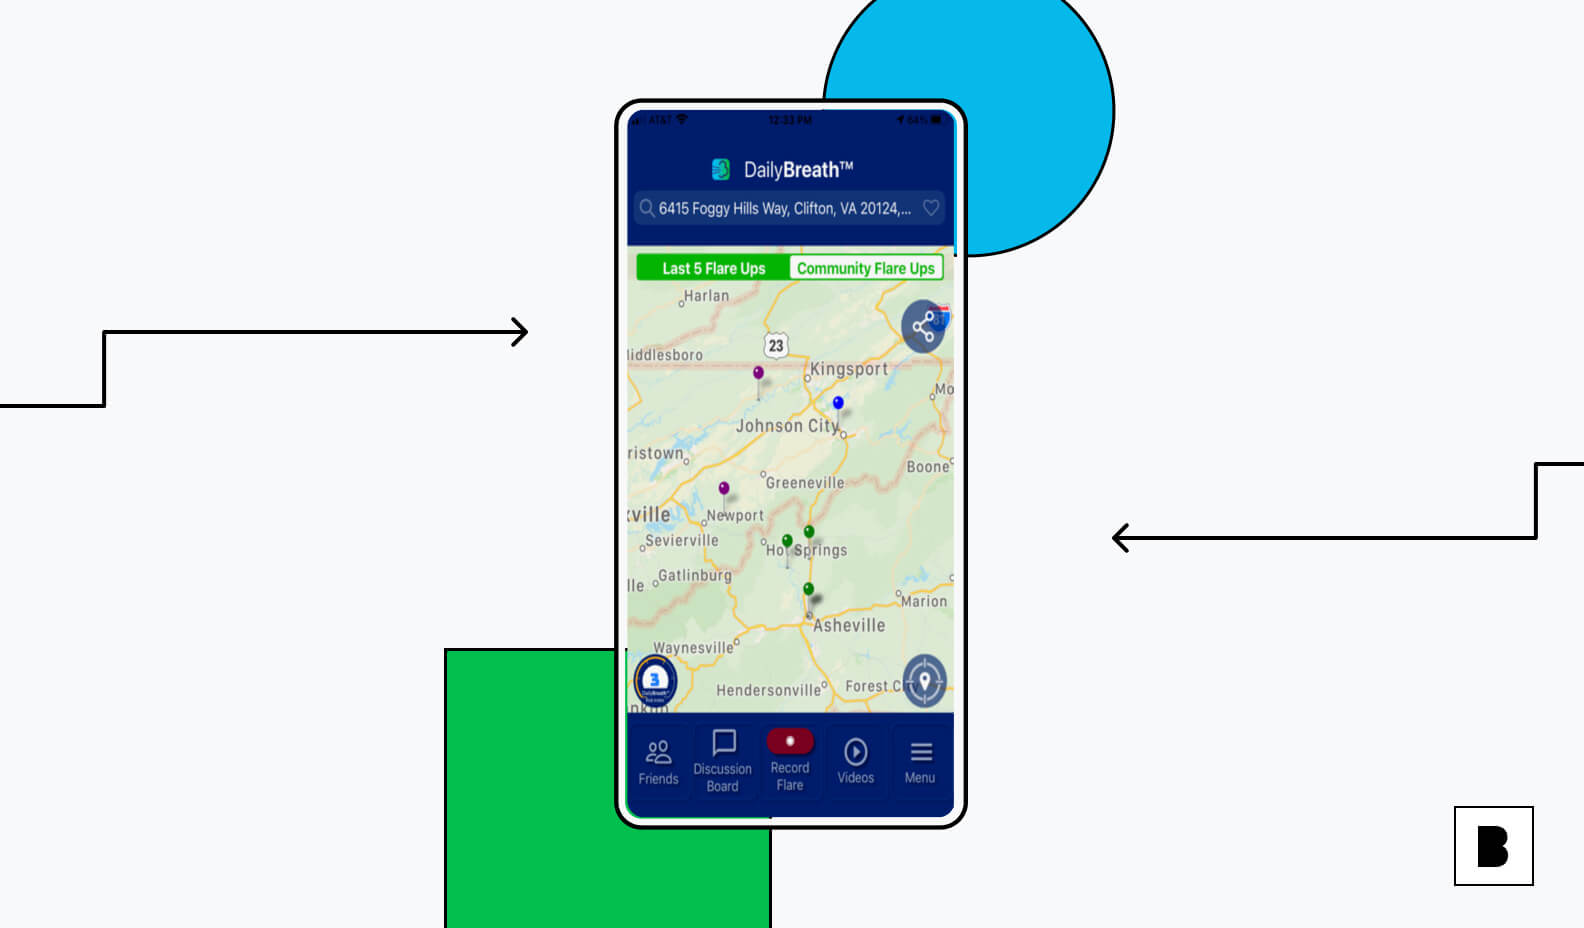 Daily Breath app screen with location map